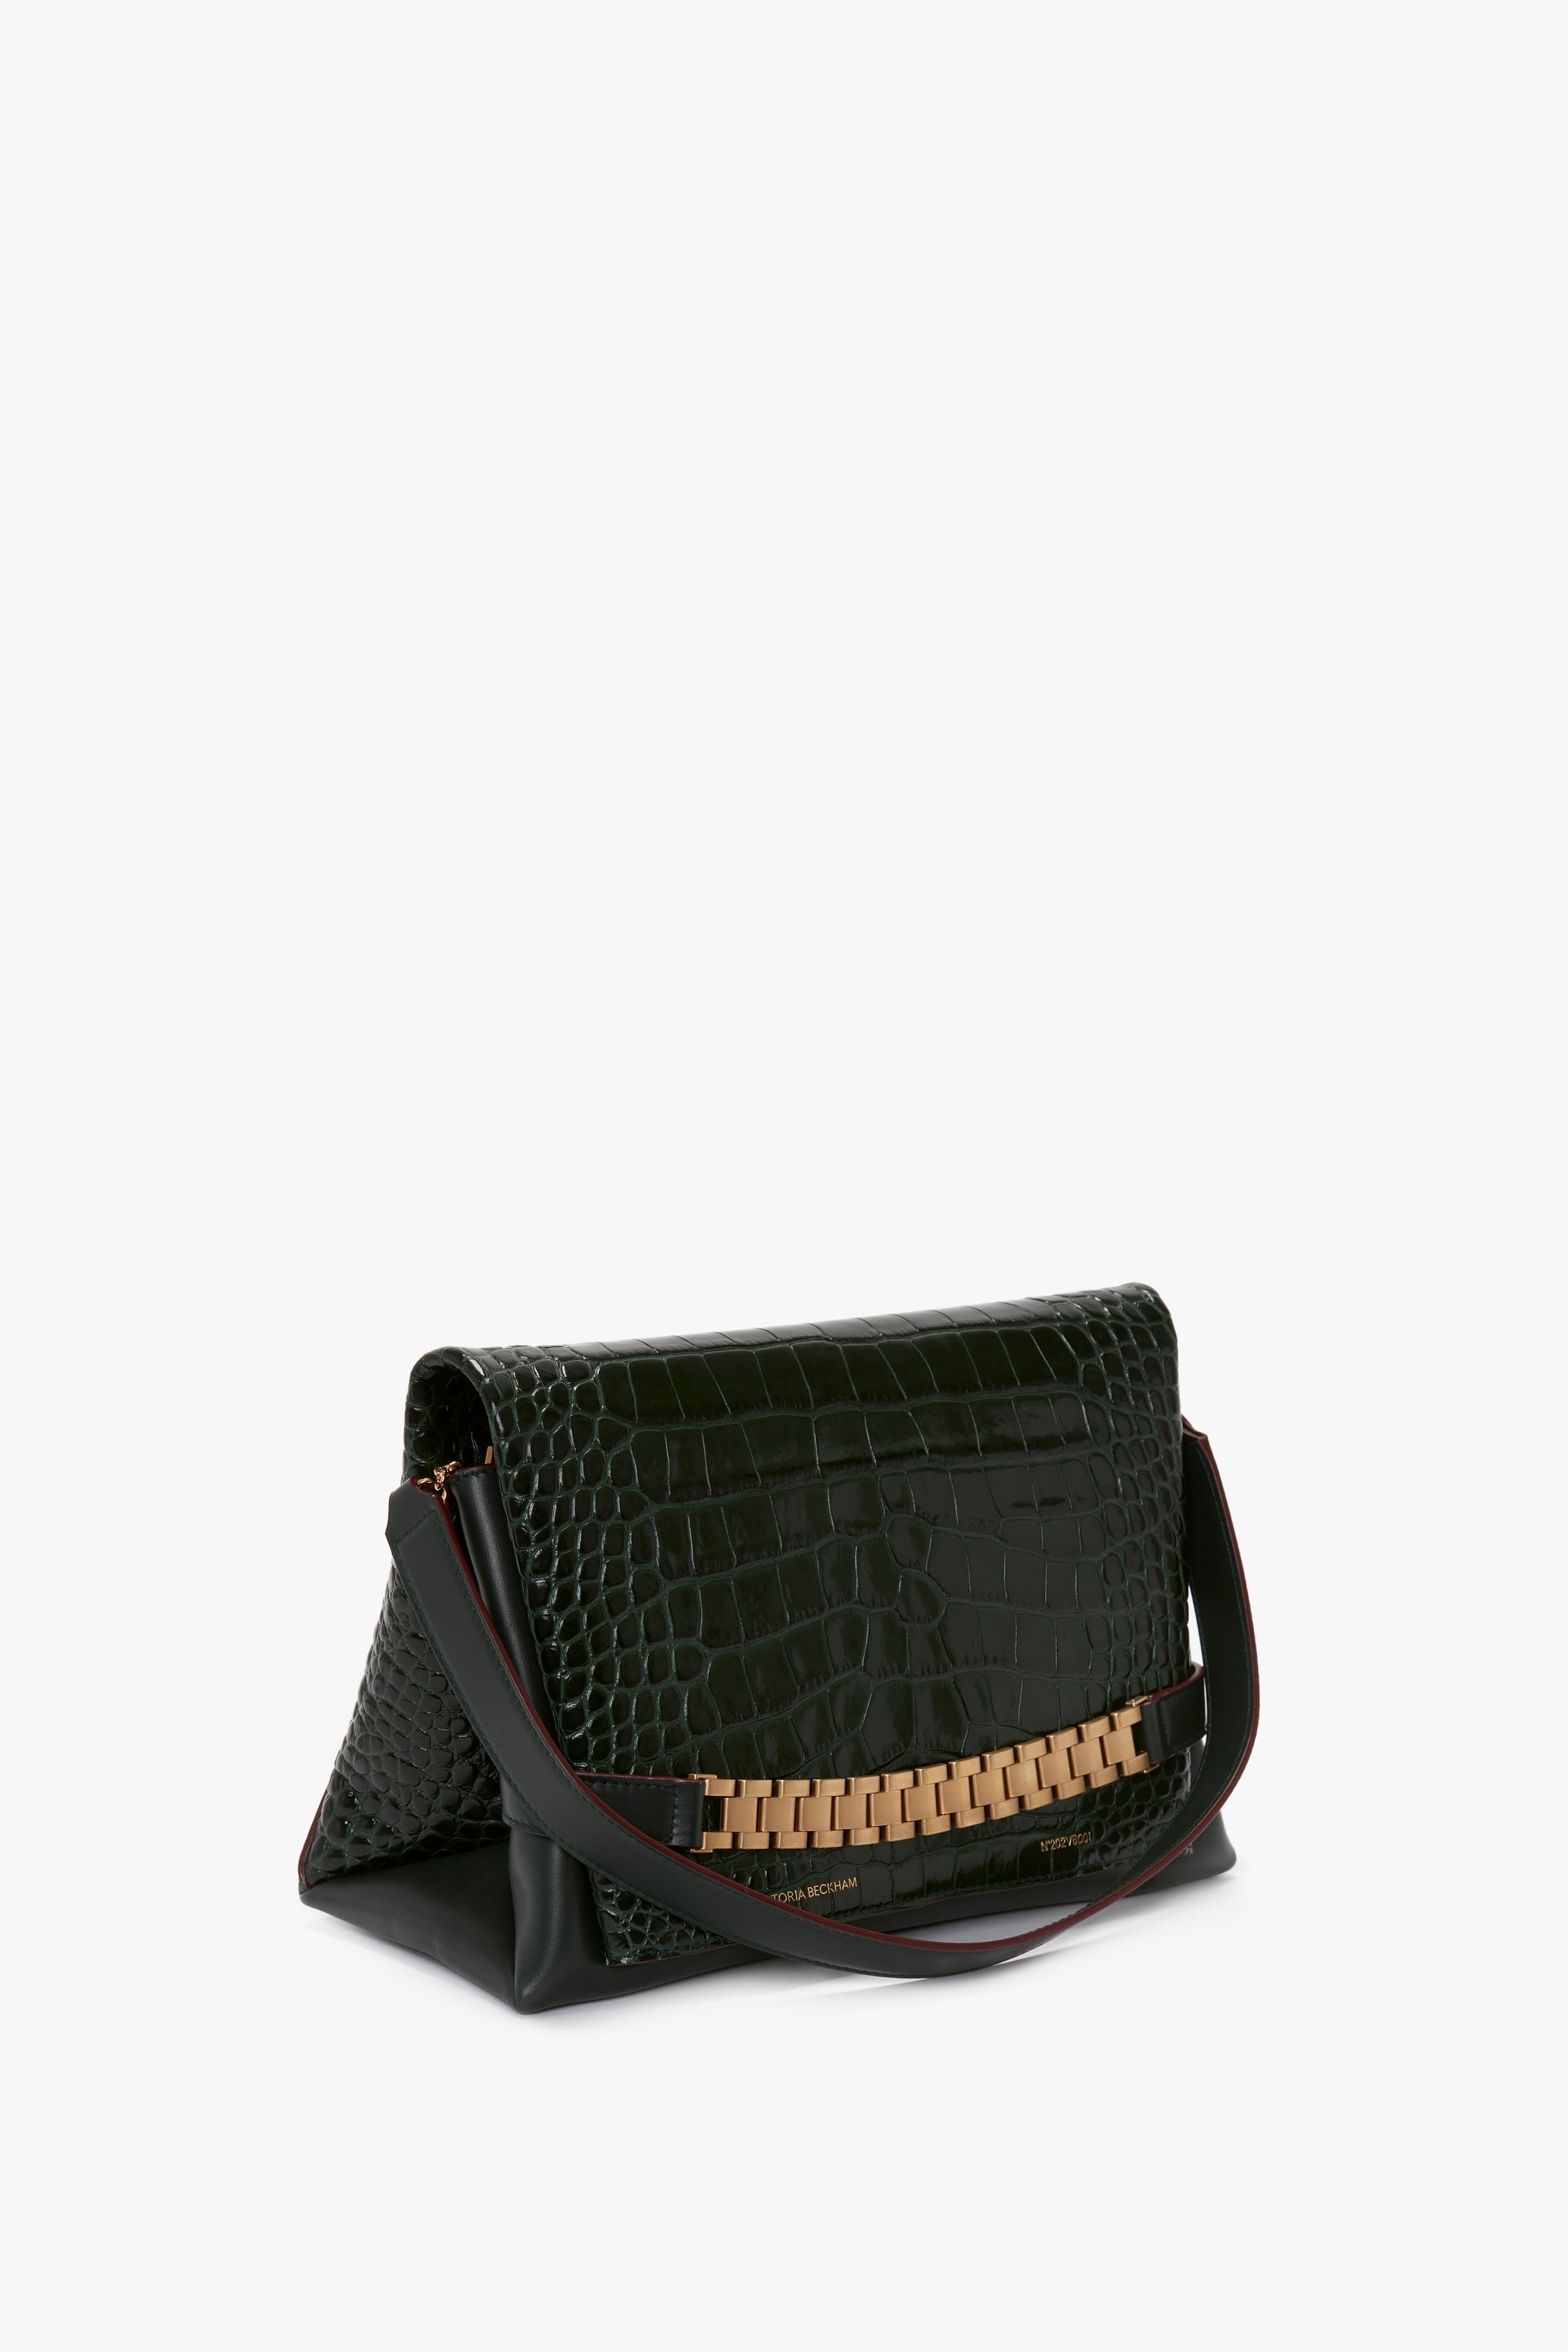 Chain Pouch With Strap In Dark Forest Croc-Effect Leather - 3